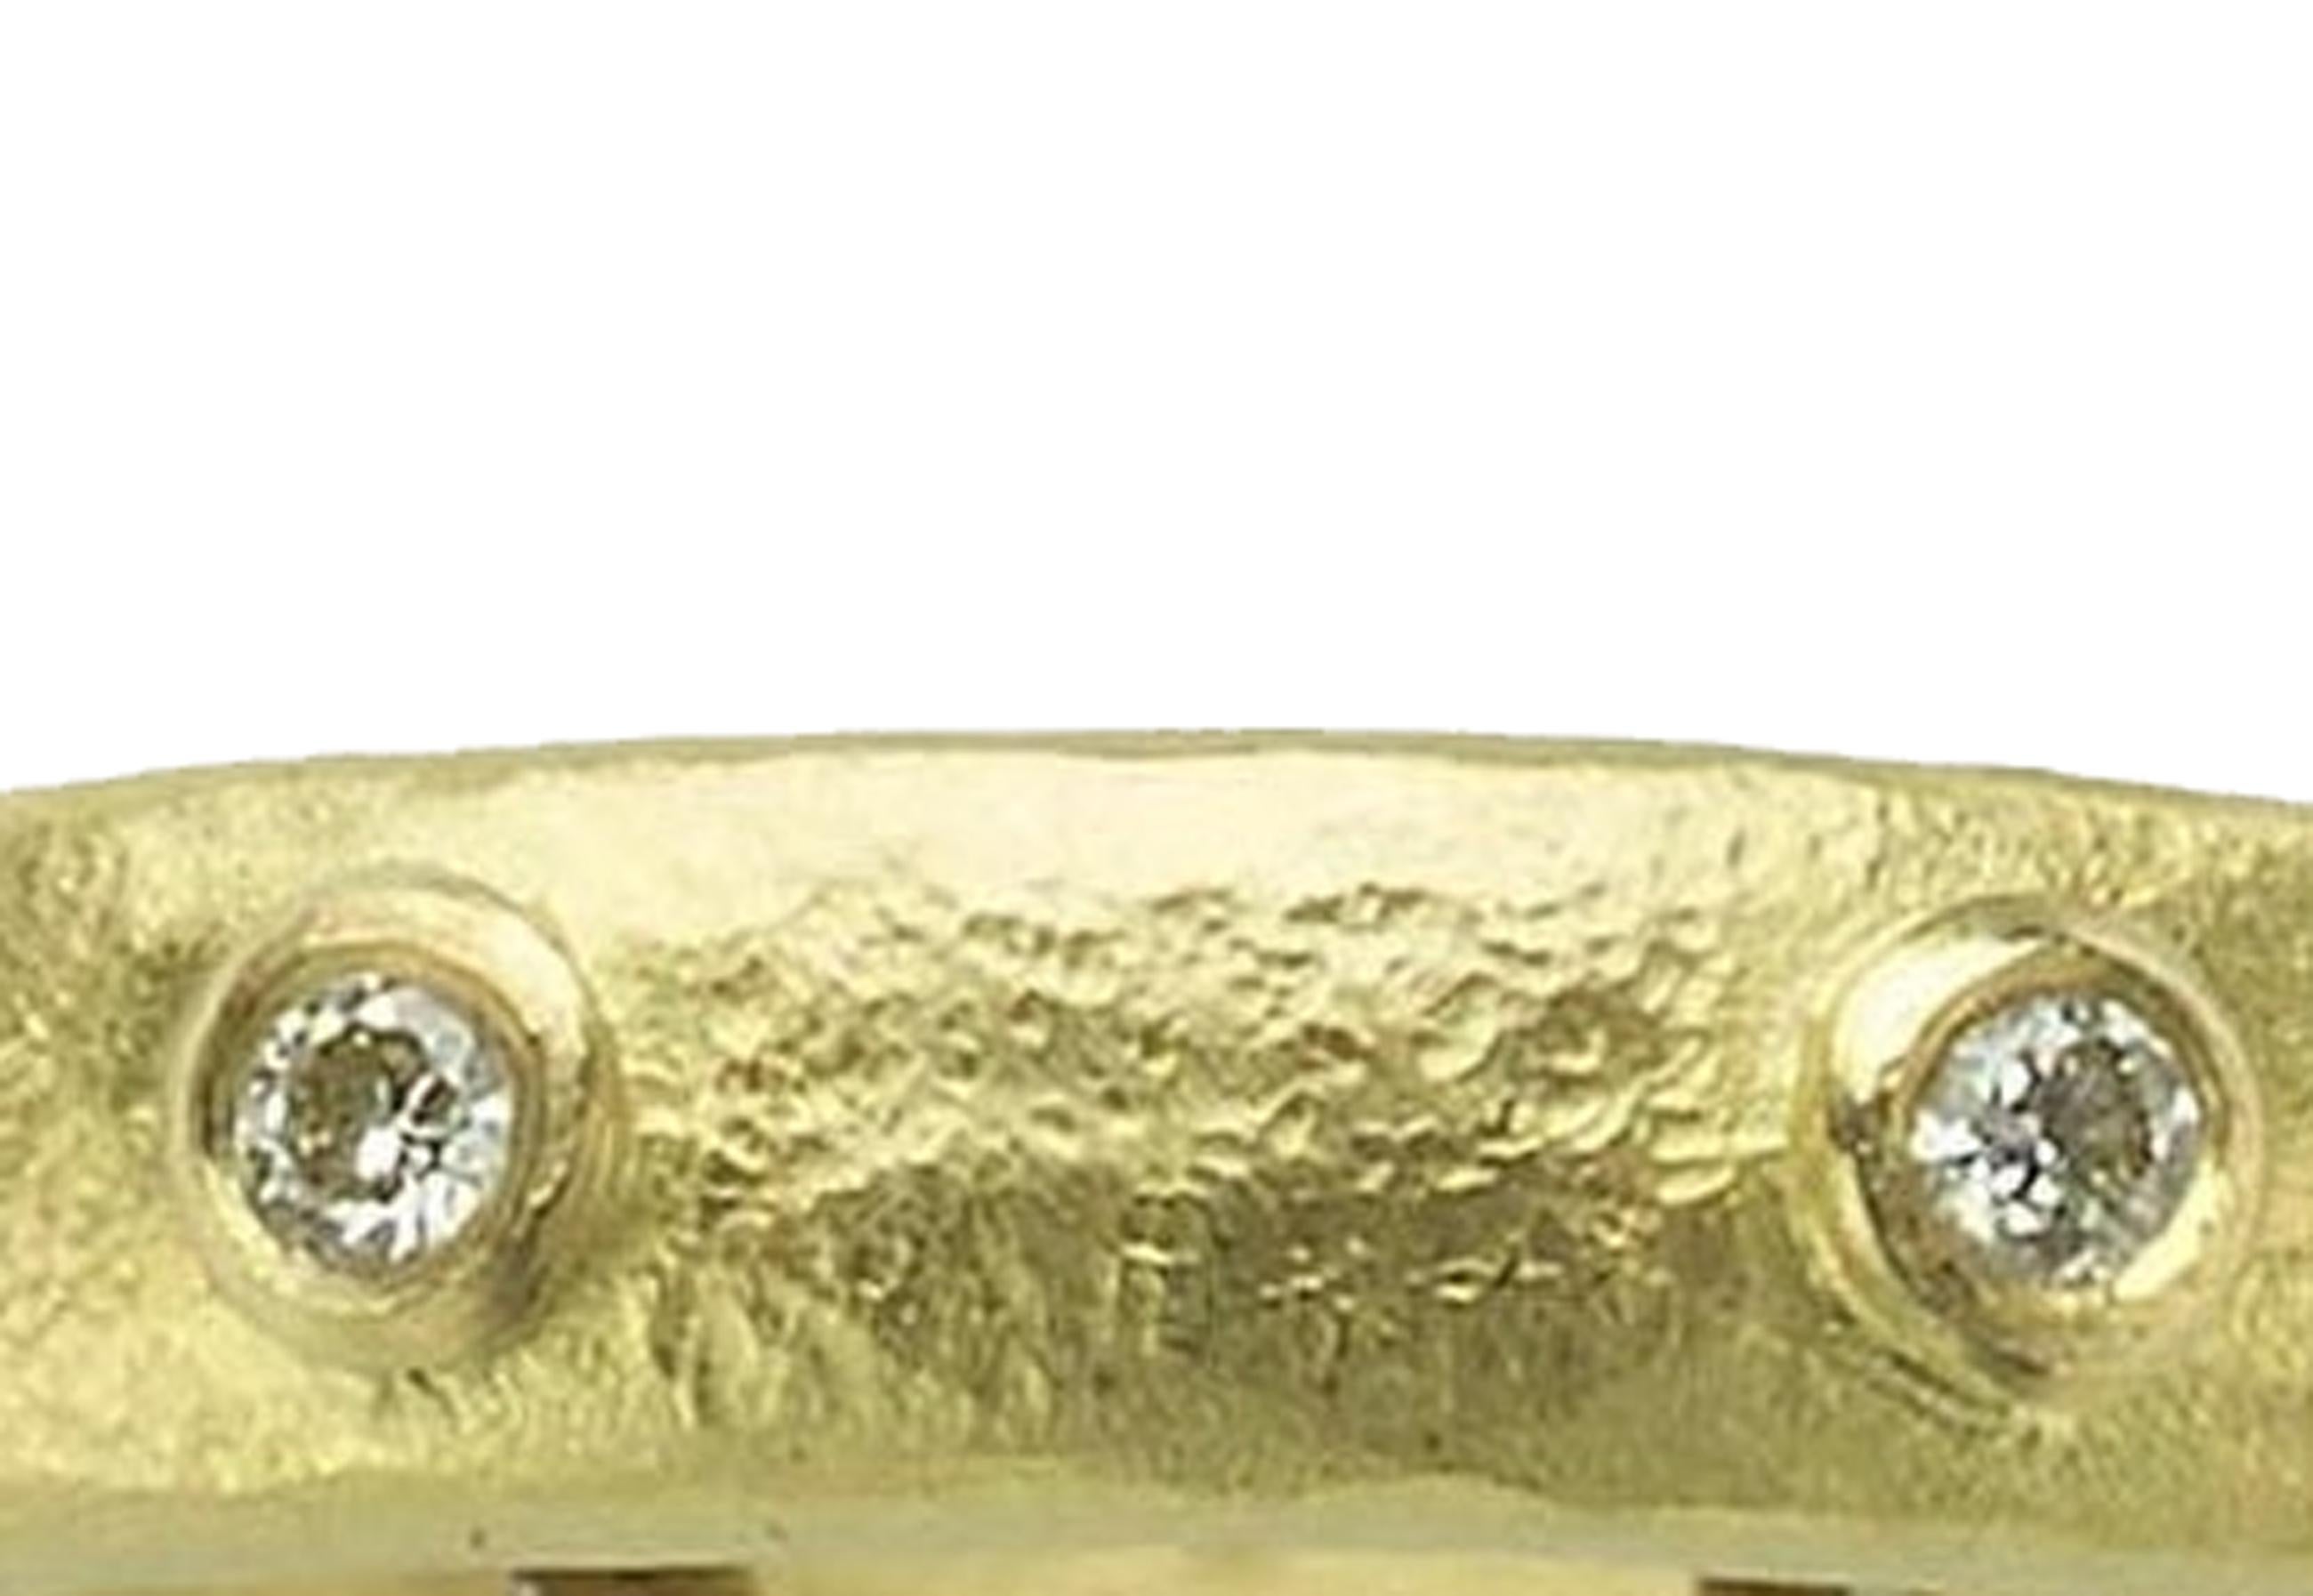 Elegant and understated 18ct yellow gold ring, with beaten texture finish, set with eight diamonds. This ring has been made by hand by Julia Lloyd George in her London studio. Ring size: N 1/2 (UK ring size)
